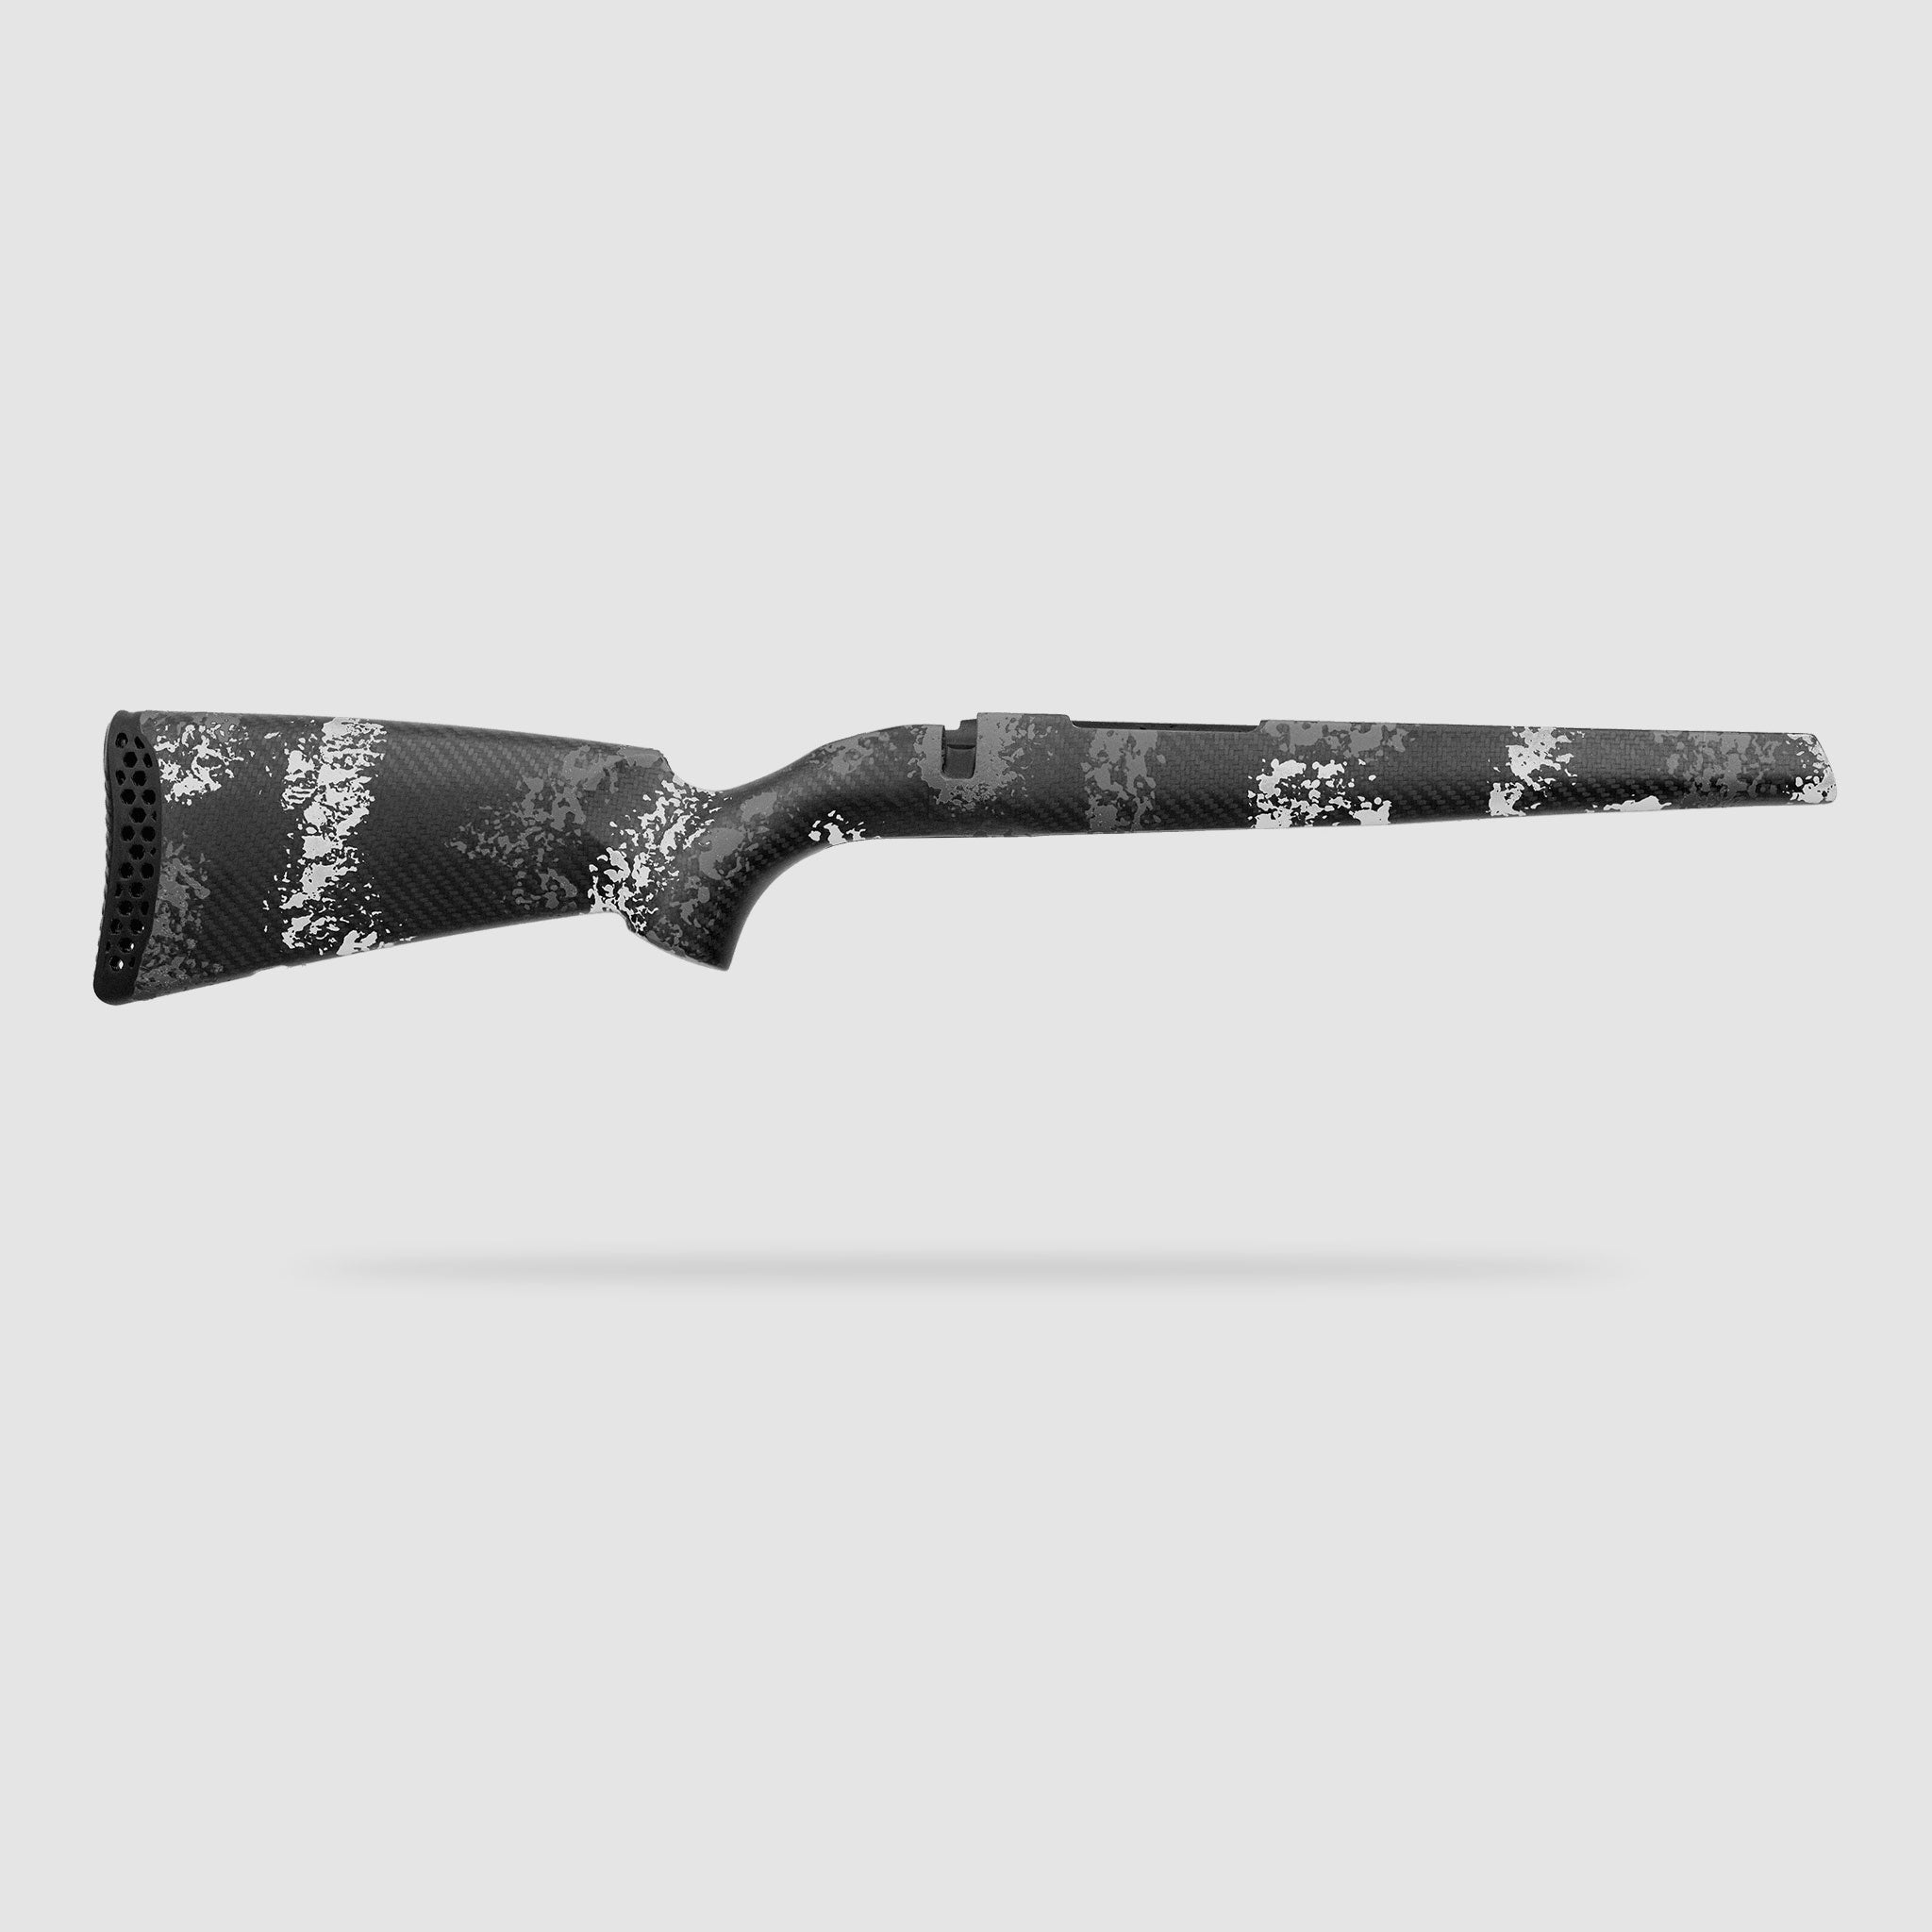 Blacktooth Vanguard Right Hand Short Action Proof Research Carbon Sendero